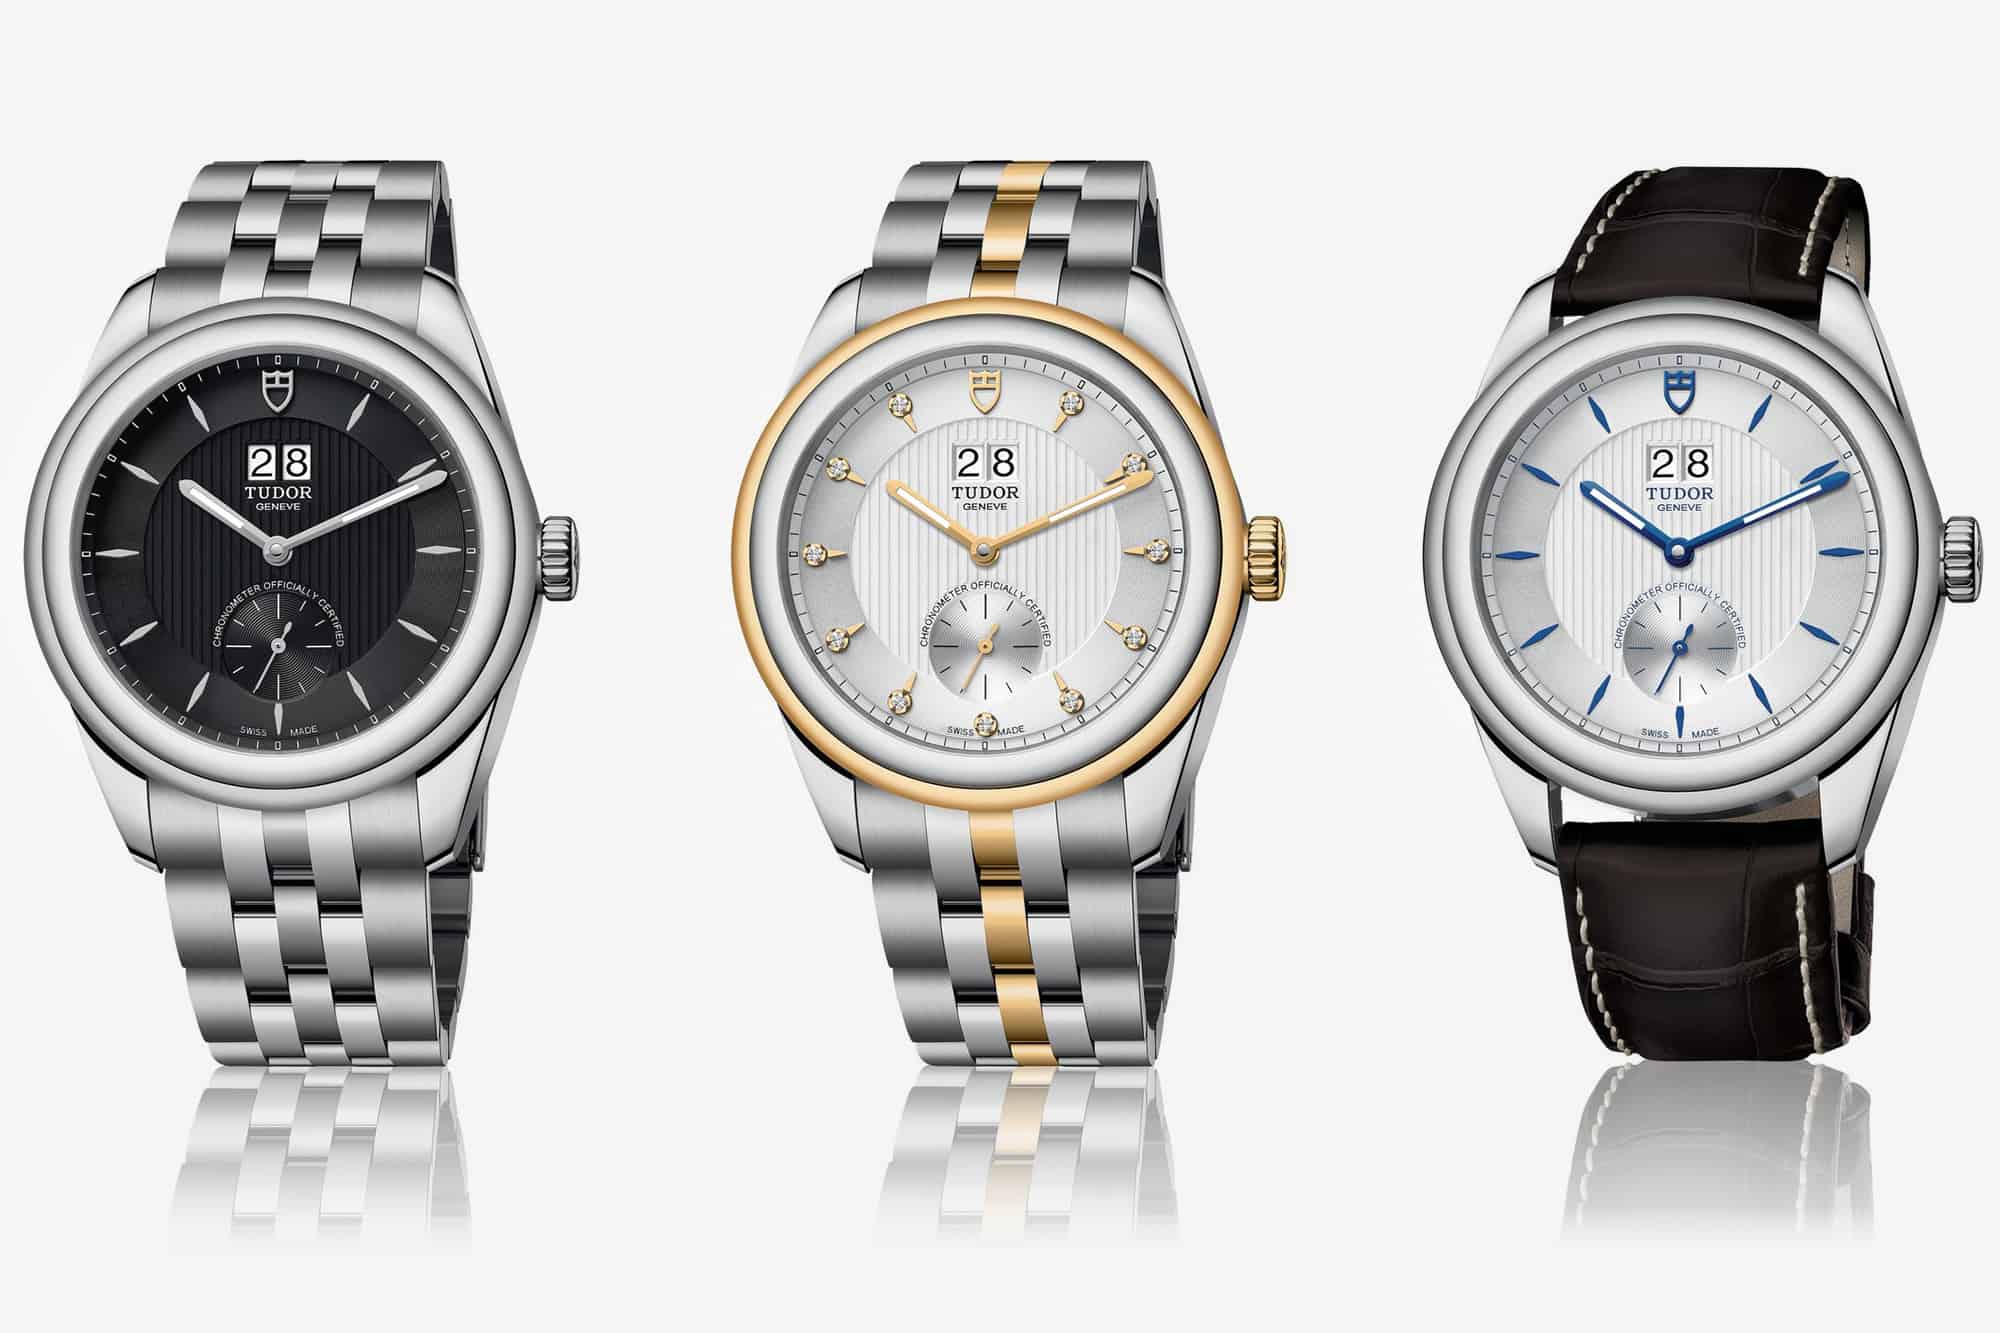 Introducing the Revamped Tudor Glamour Double Date, Now With a New In-House Movement